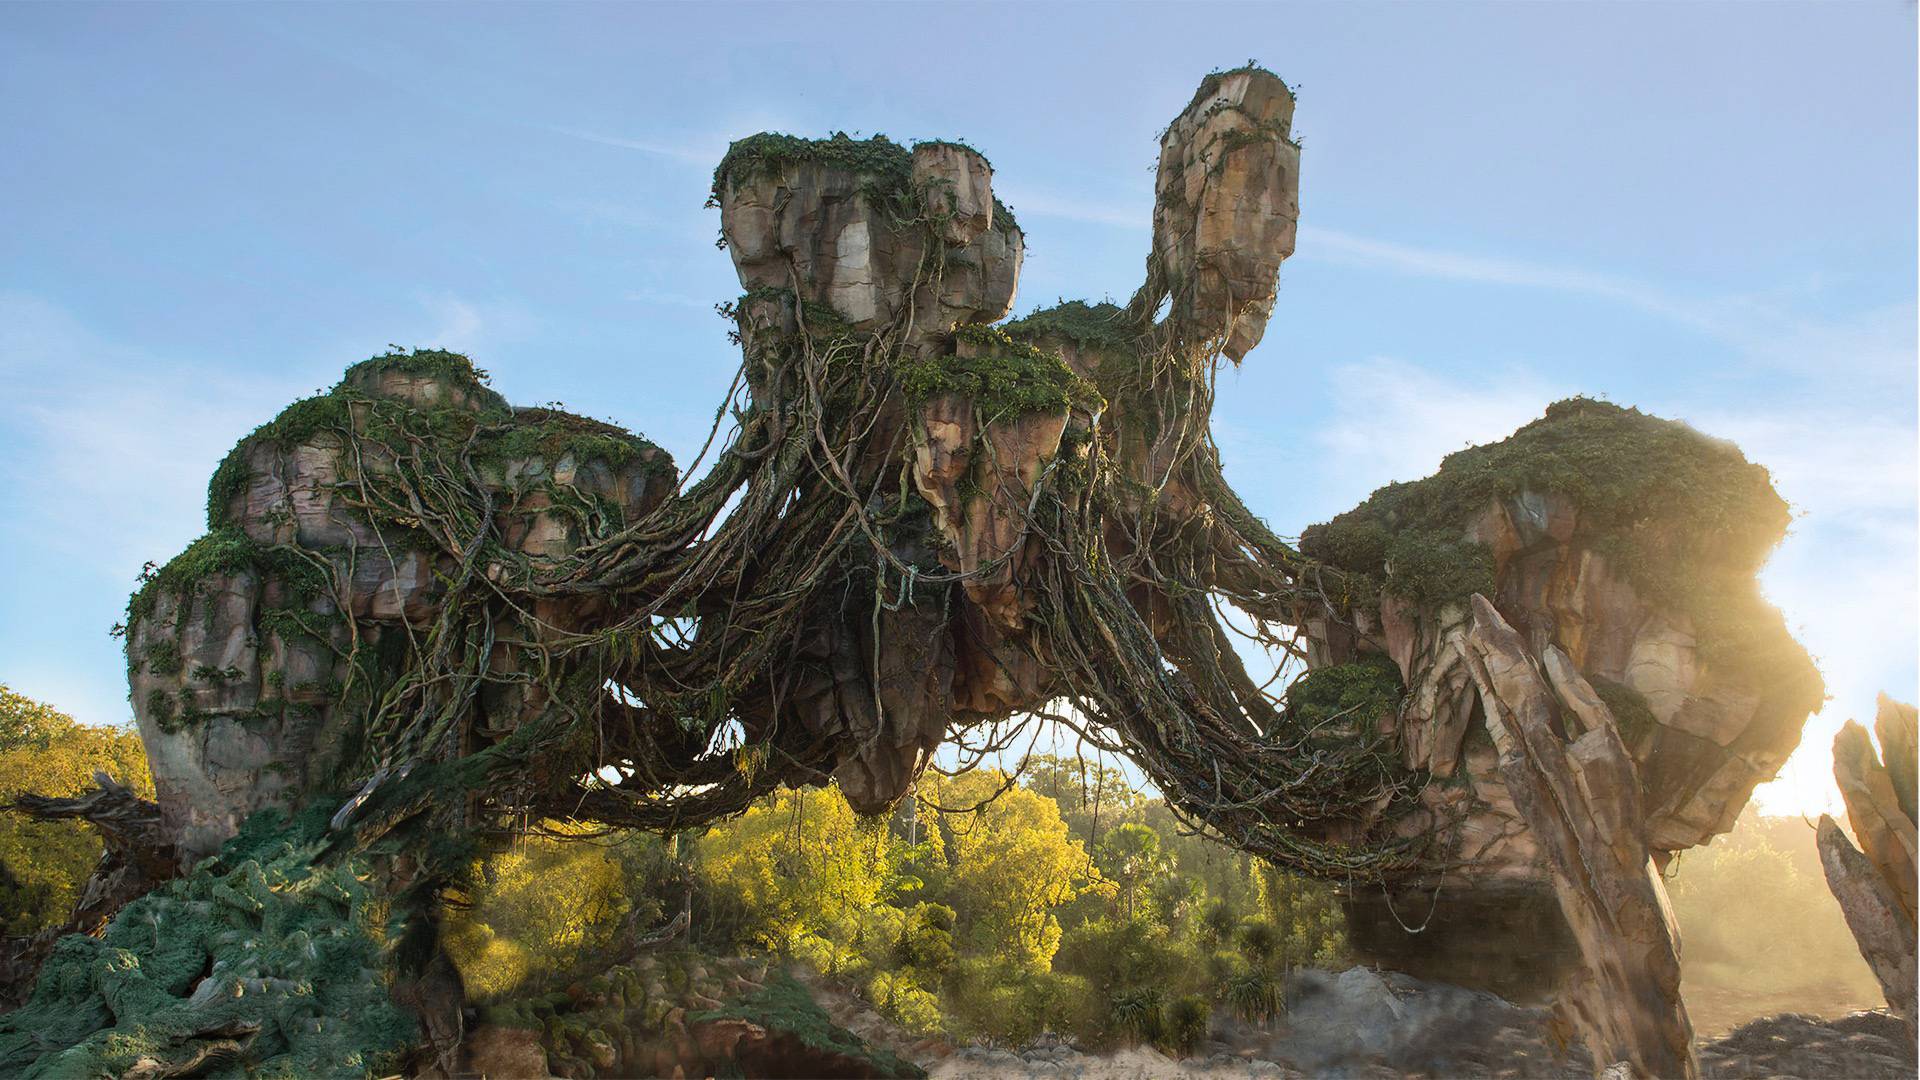 AVATAR land is officially named - 'Pandora - The World of AVATAR'